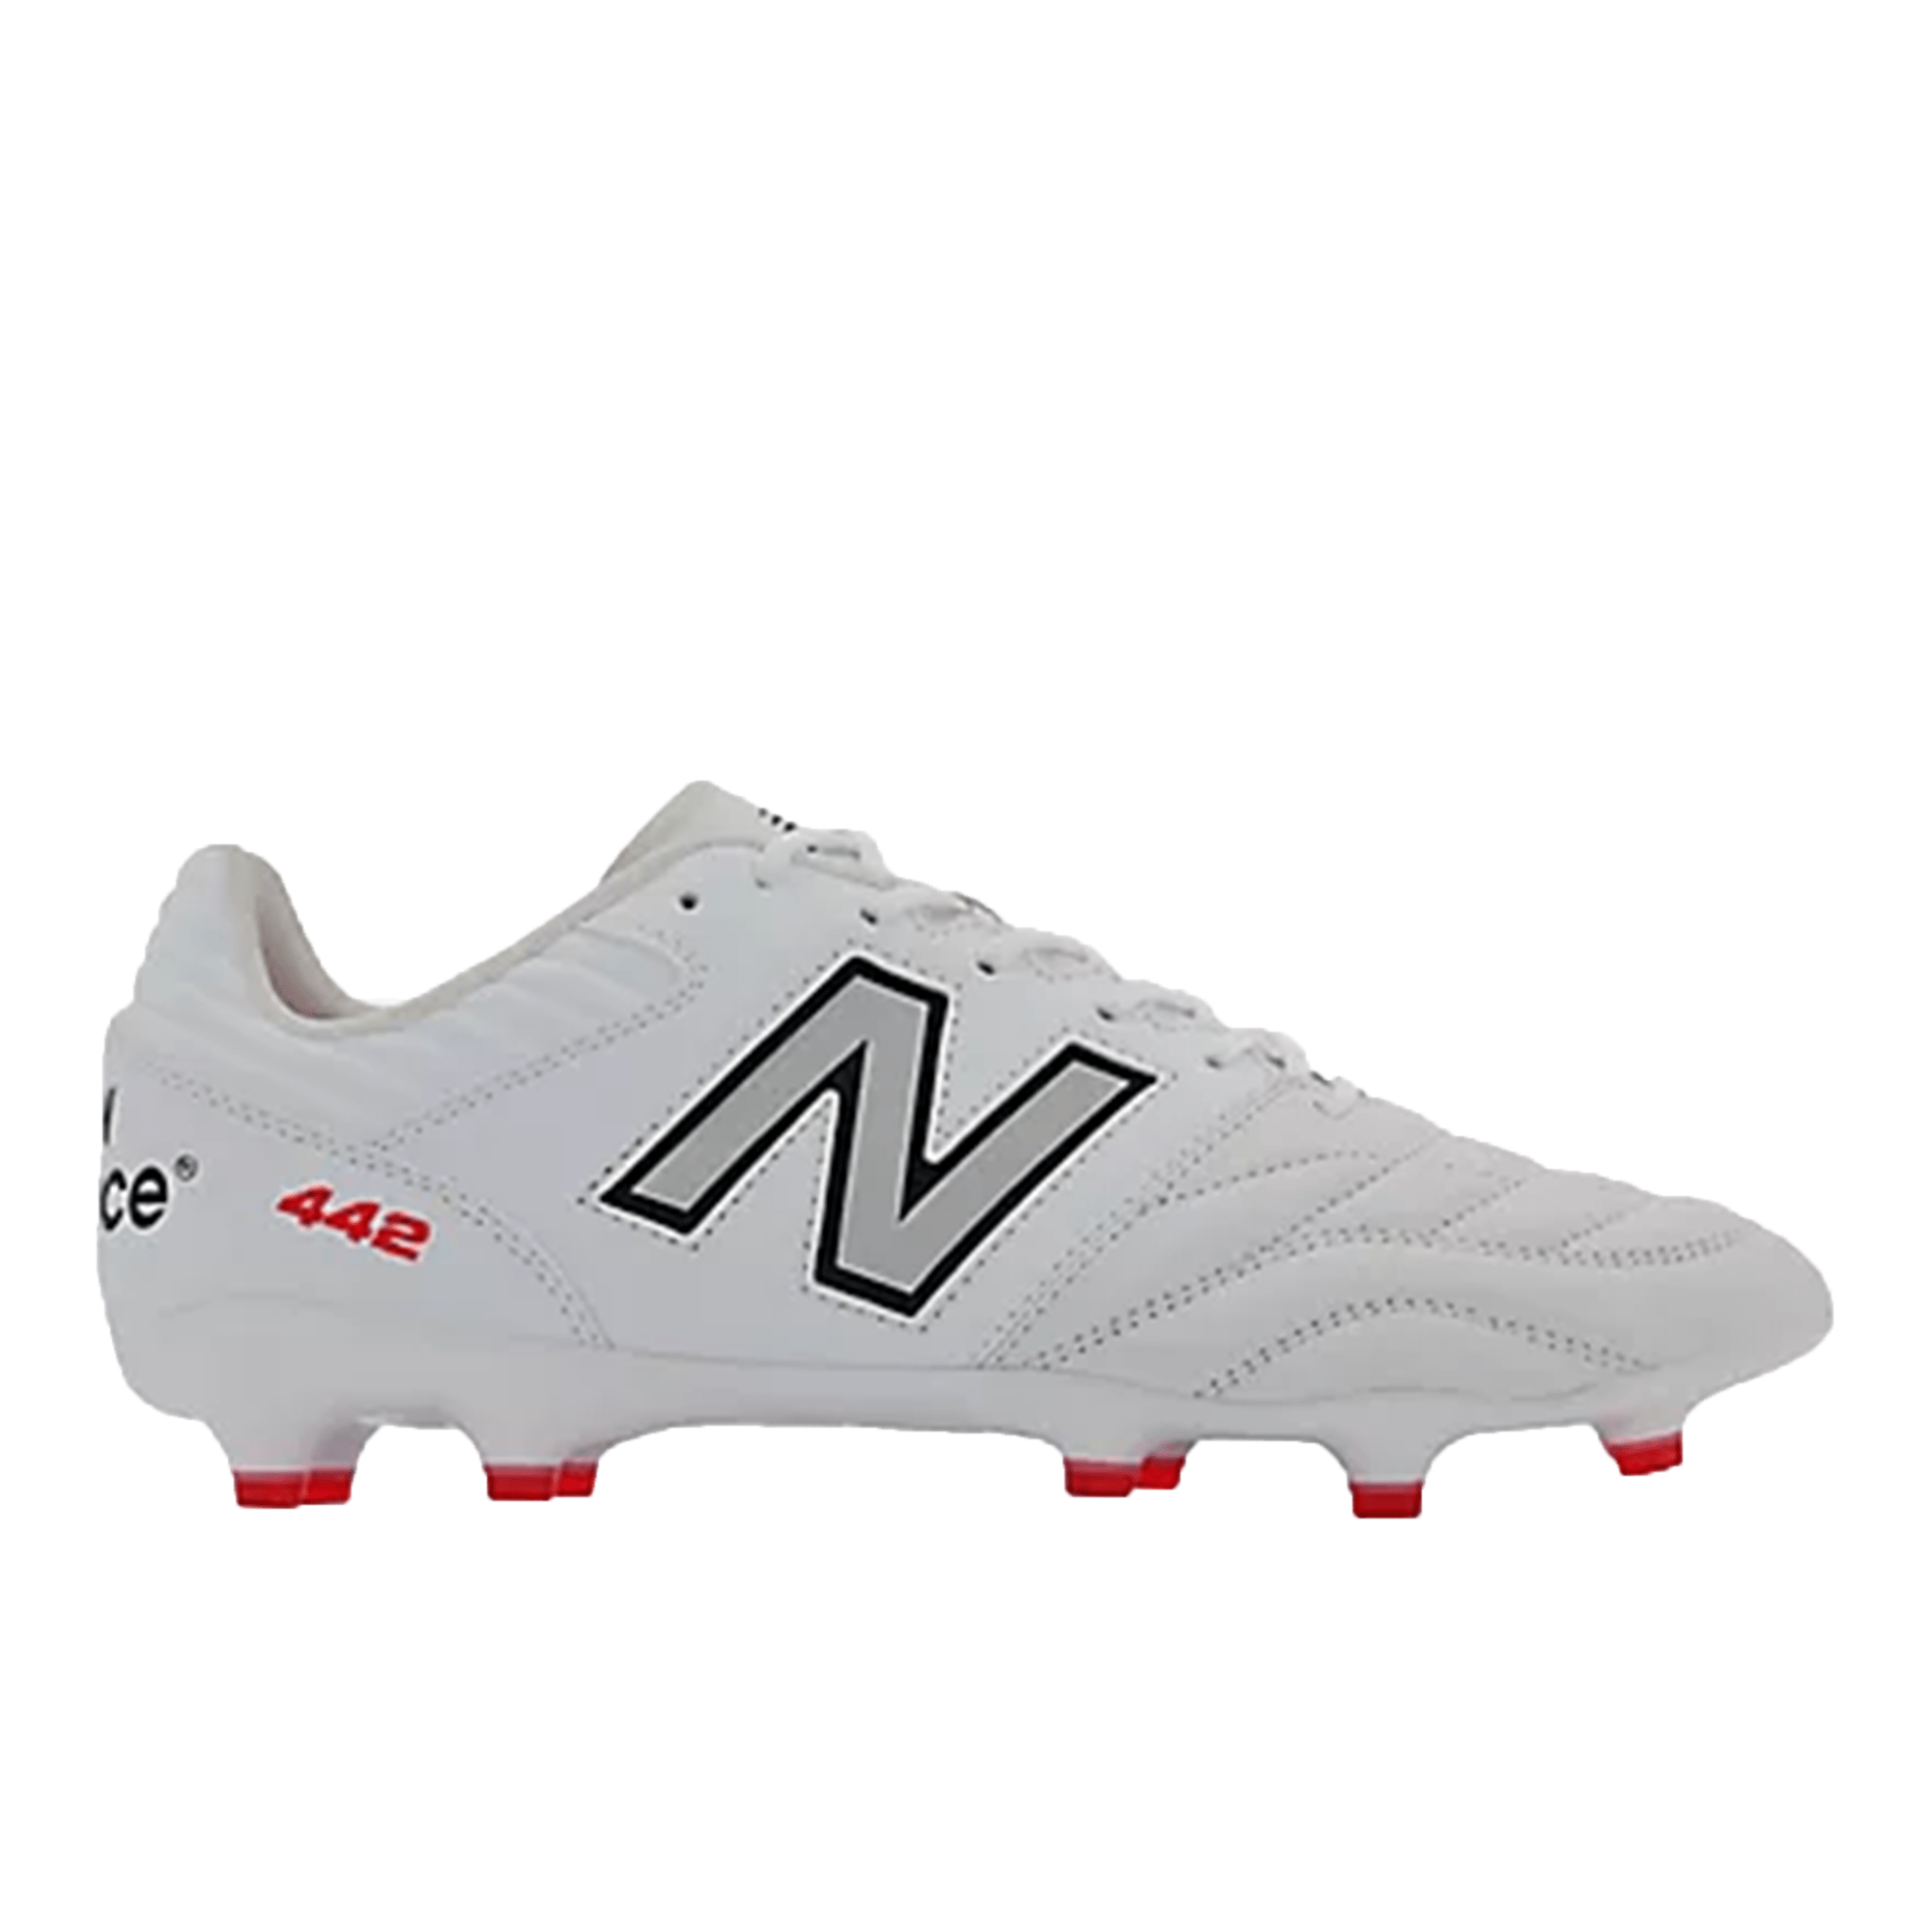 New Balance 442 V2 Pro Rugby Cleat - Firm Ground Boot - White